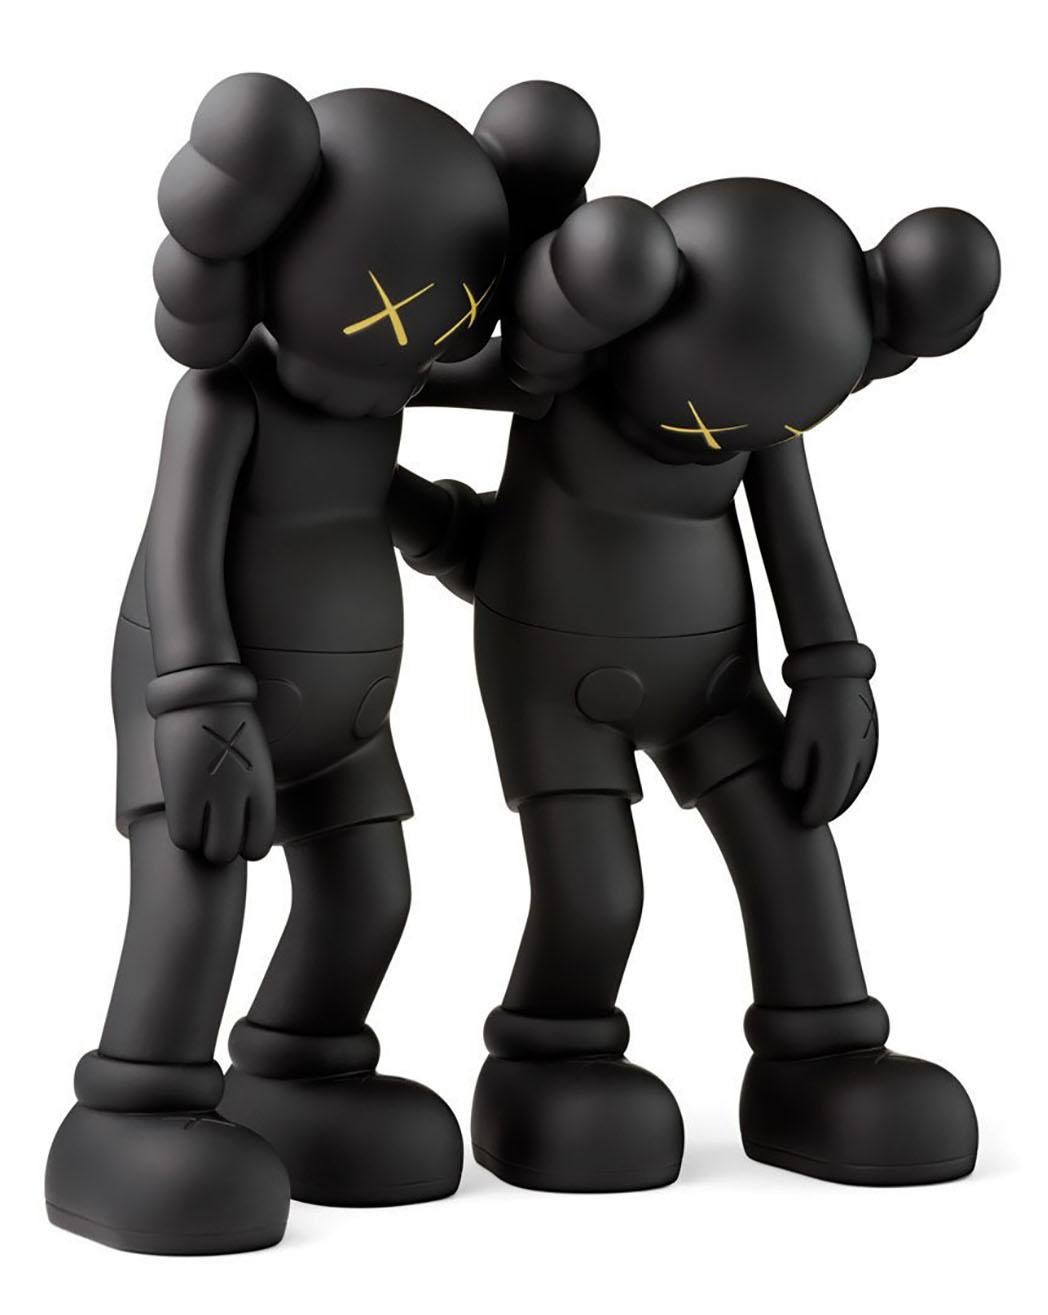 KAWS Companion 2016-2019:
A curated set of 4 individual Black KAWS Companions new & unopened in original packaging. 

KAWS Clean Slate, 2018: 14.25 x 8 x 8 inches. 
KAWS Black Companion 2016: 11 x 5 inches. 
KAWS Along The Way 2019: 10,5 x 9 inches.